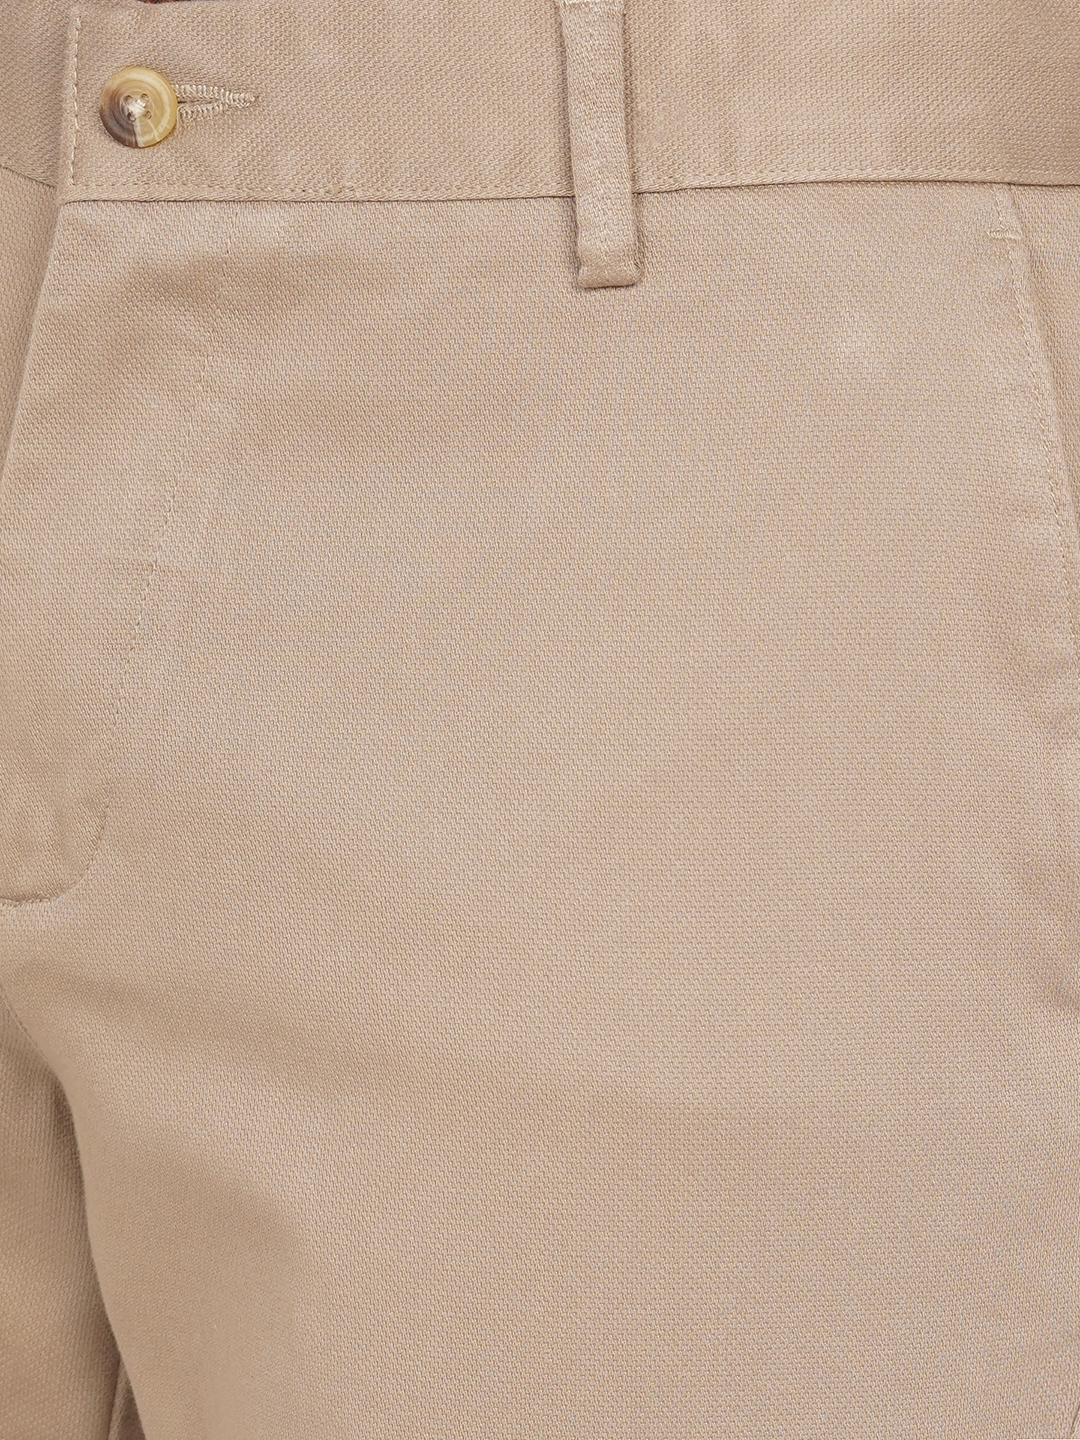 Greenfibre | Light Khaki Solid Slim Fit Casual Trouser | Greenfibre 4